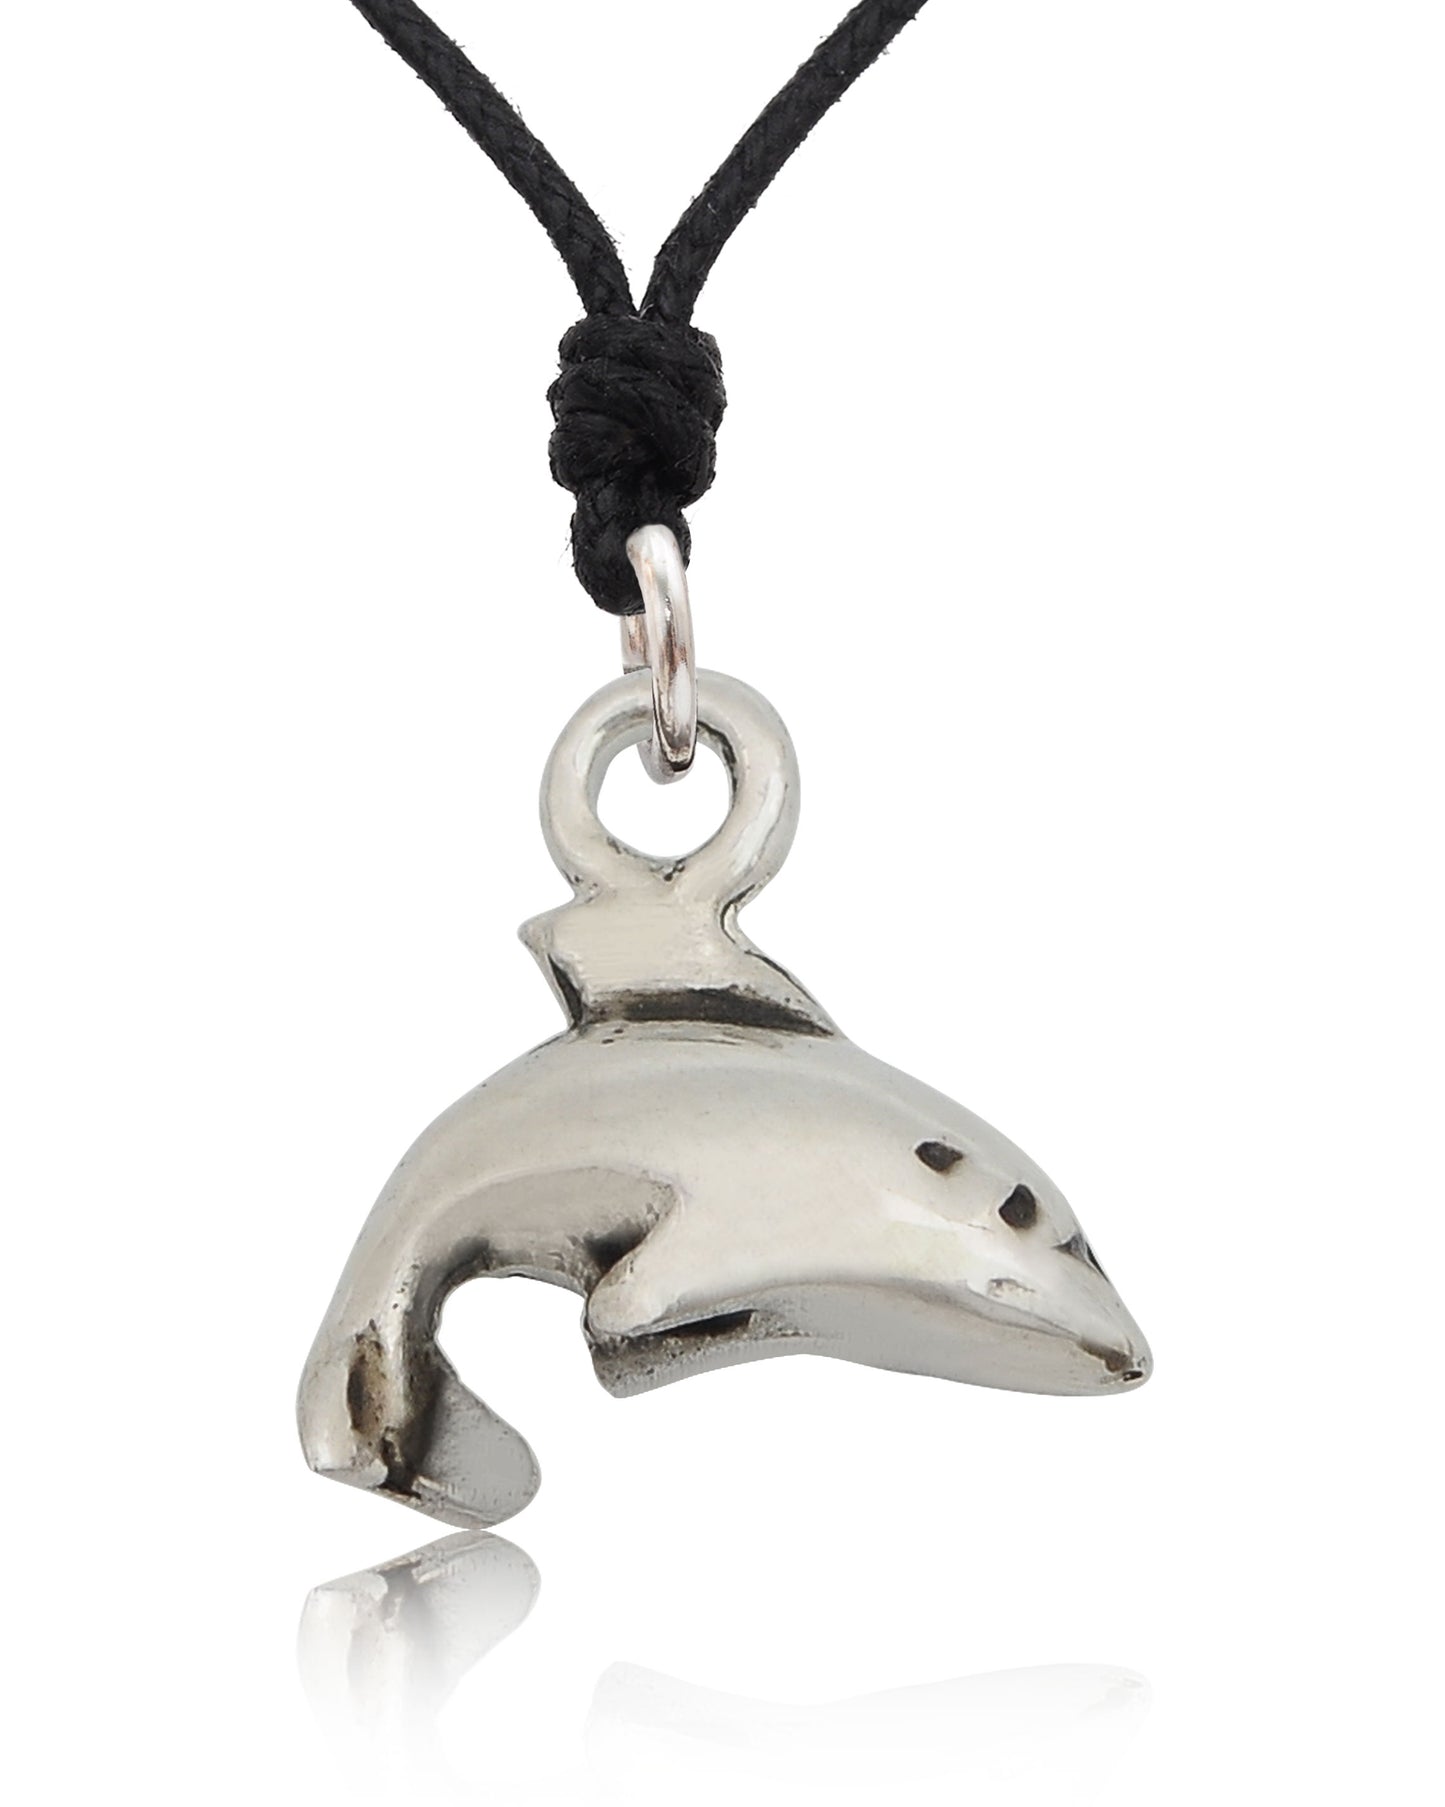 New Handmade Dolphin Silver Pewter Charm Necklace Pendant Jewelry With Cotton Cord